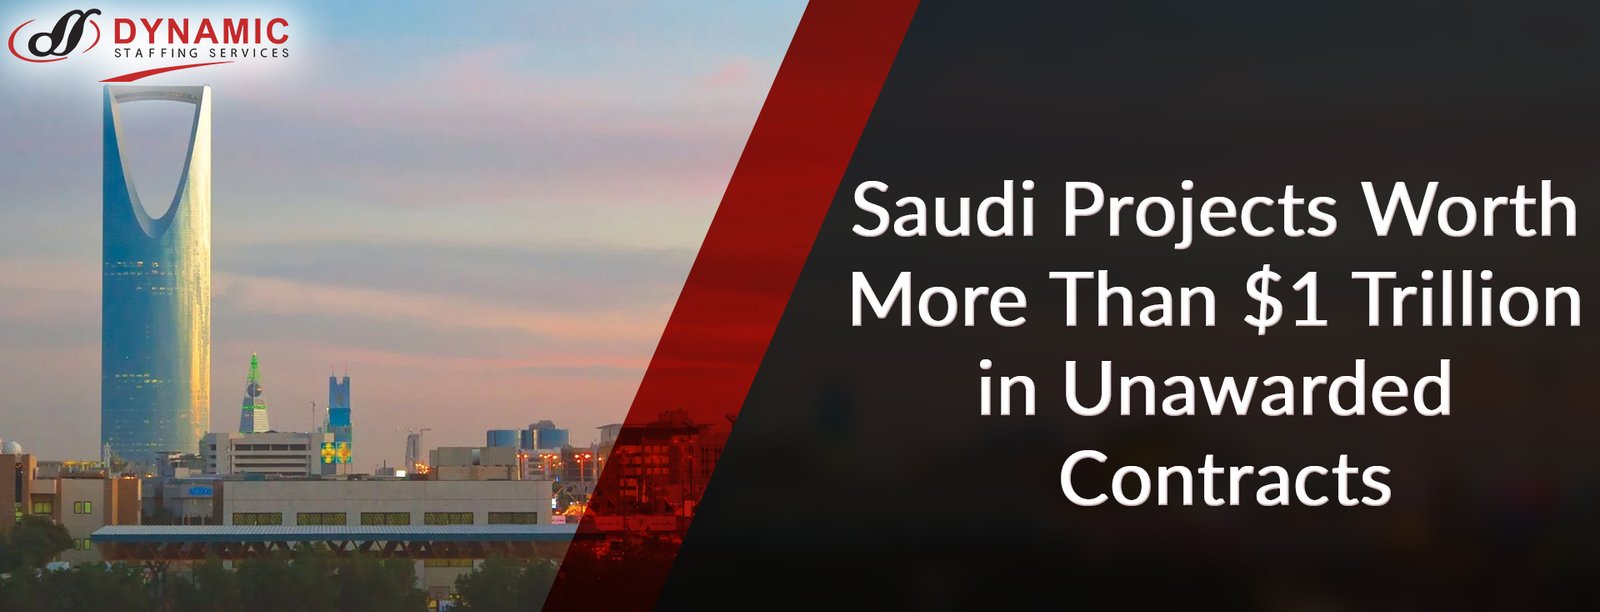 Saudi Projects Worth More Than $1 Trillion in Unawarded Contracts